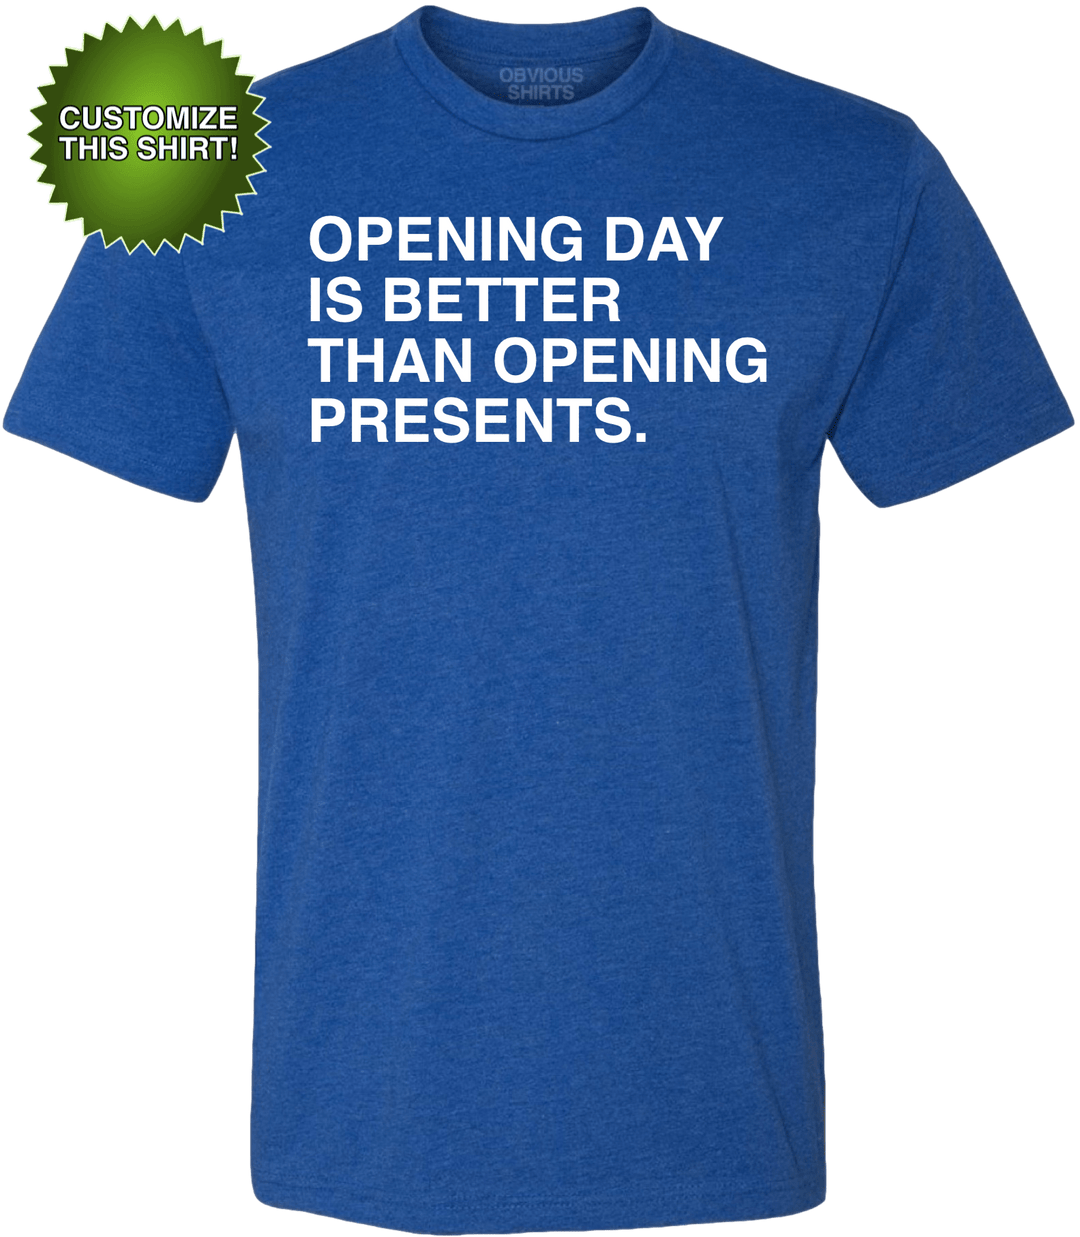 OPENING DAY IS BETTER THAN OPENING PRESENTS. (CUSTOMIZE) - OBVIOUS SHIRTS